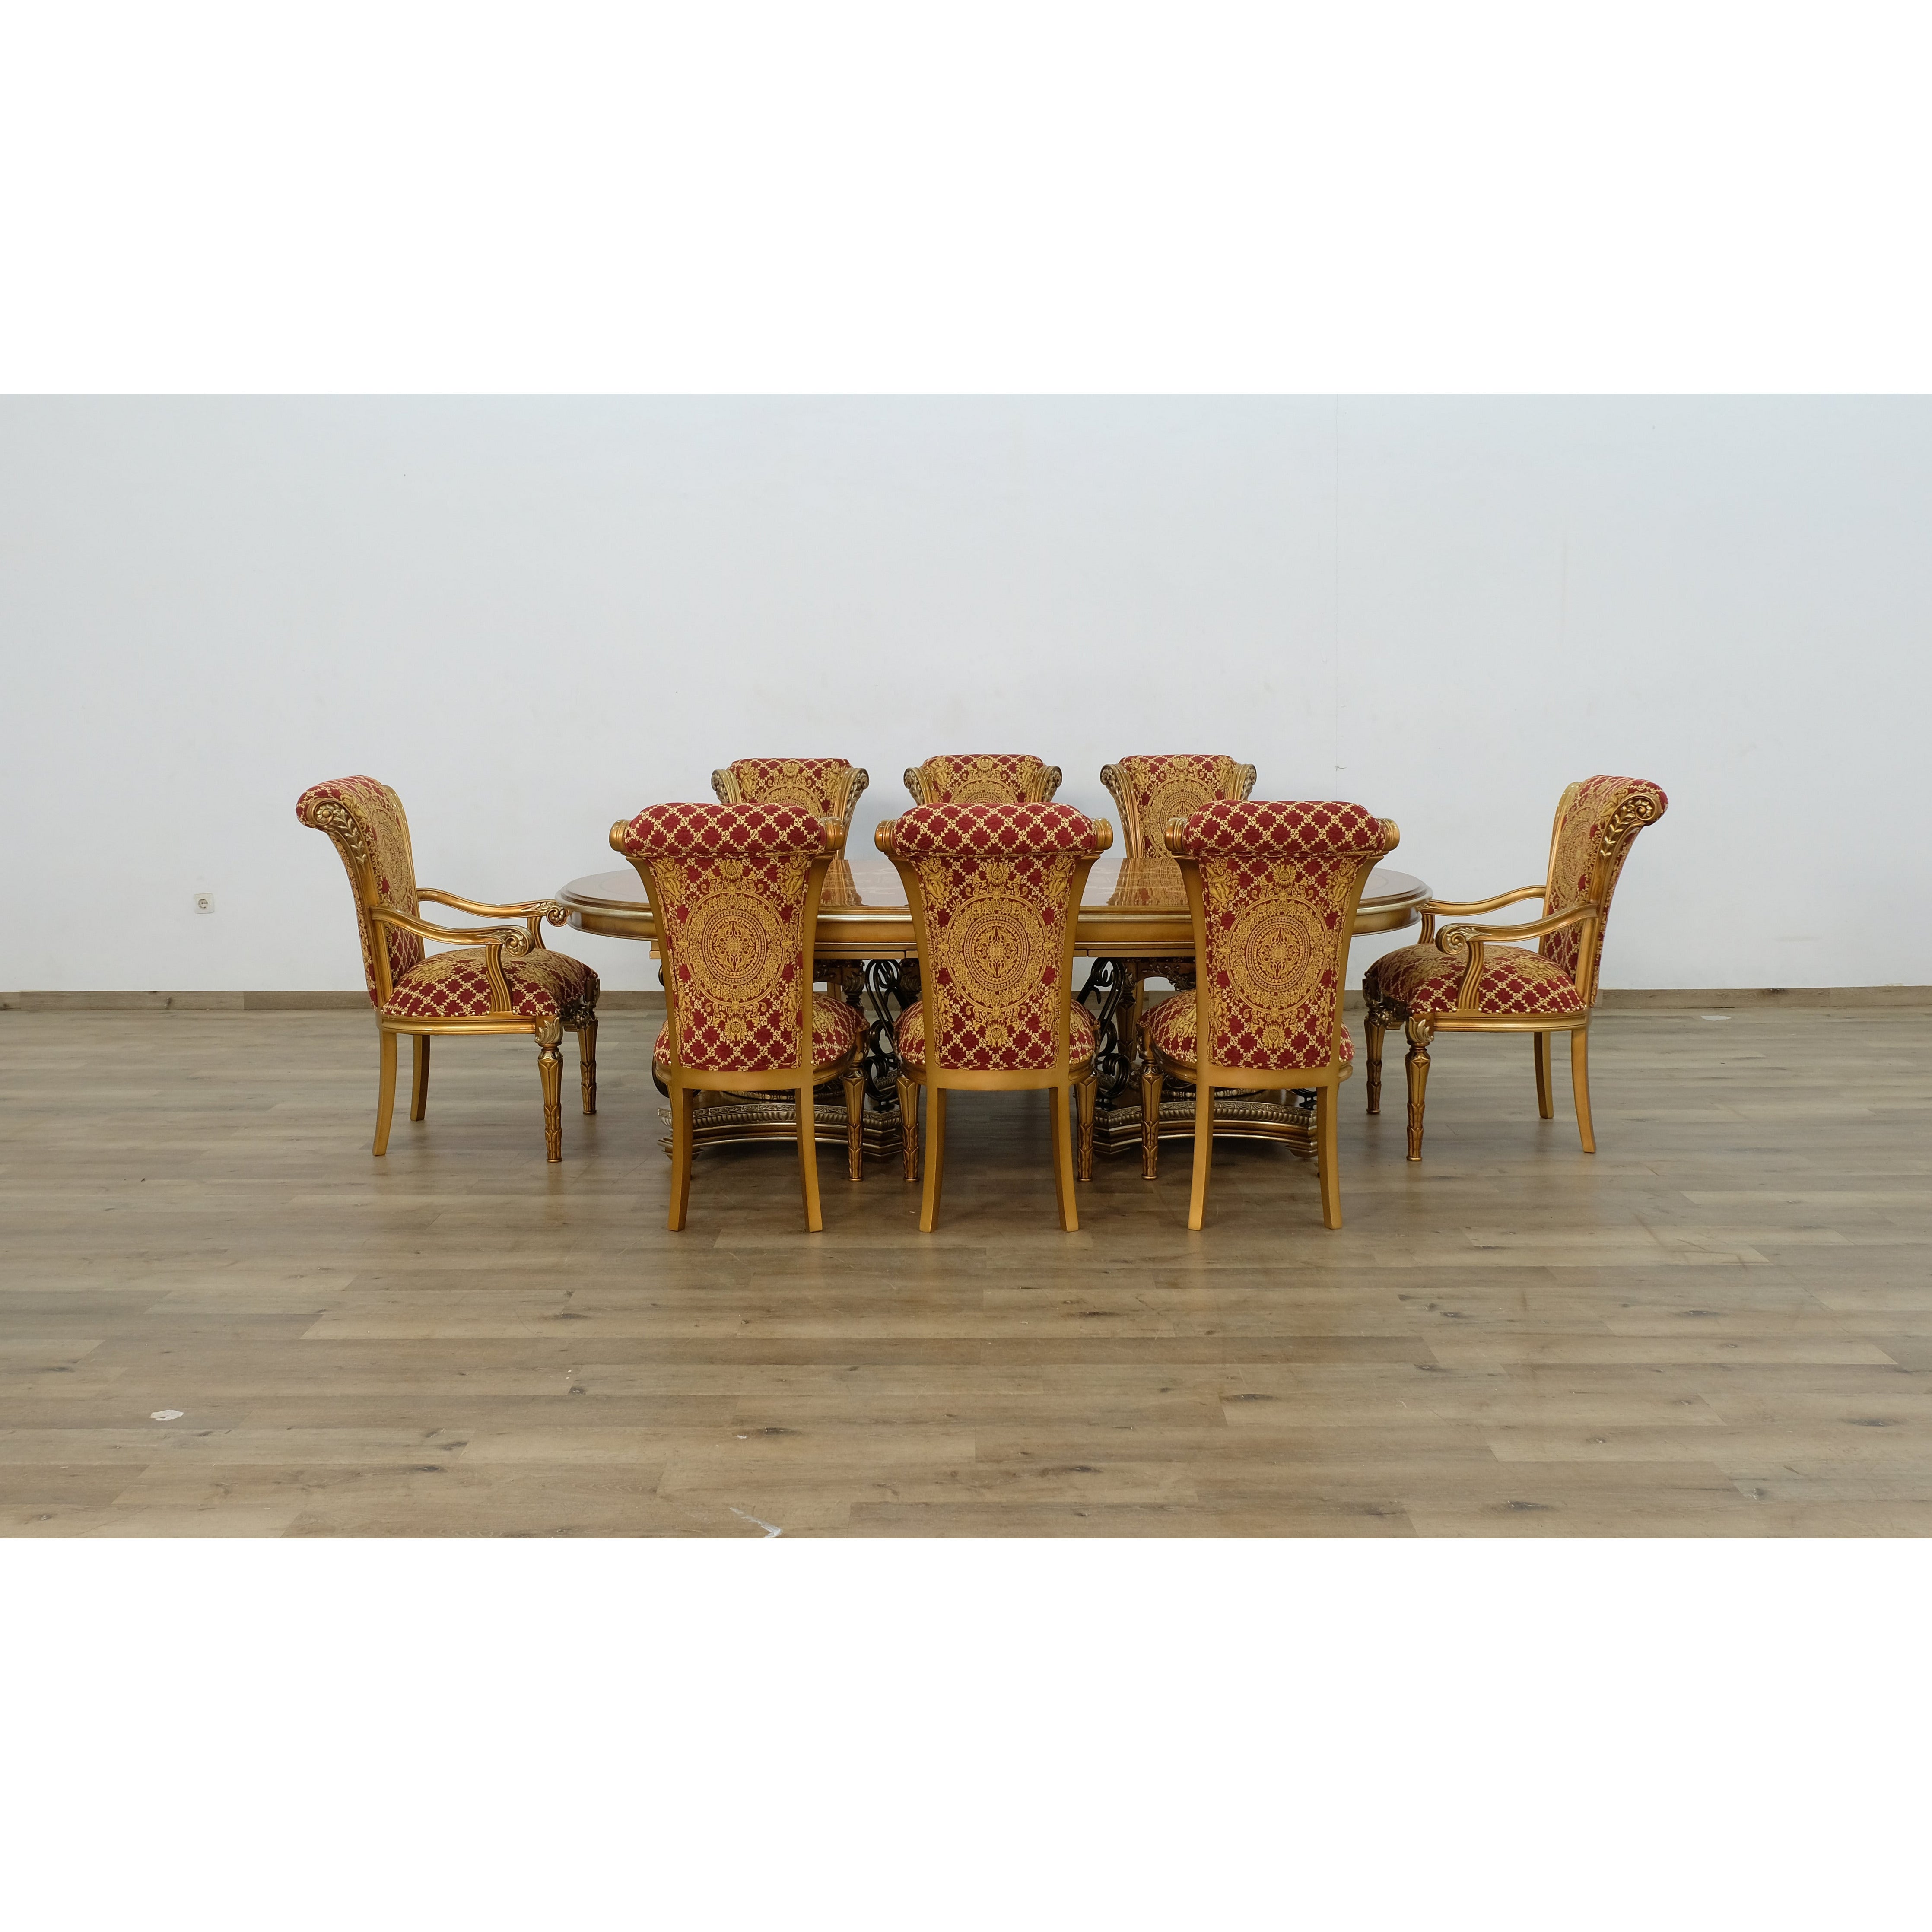 European Furniture - Valentina 9 Piece Dining Room Set With Gold Red Chair - 51955-61959-9SET - New Star Living